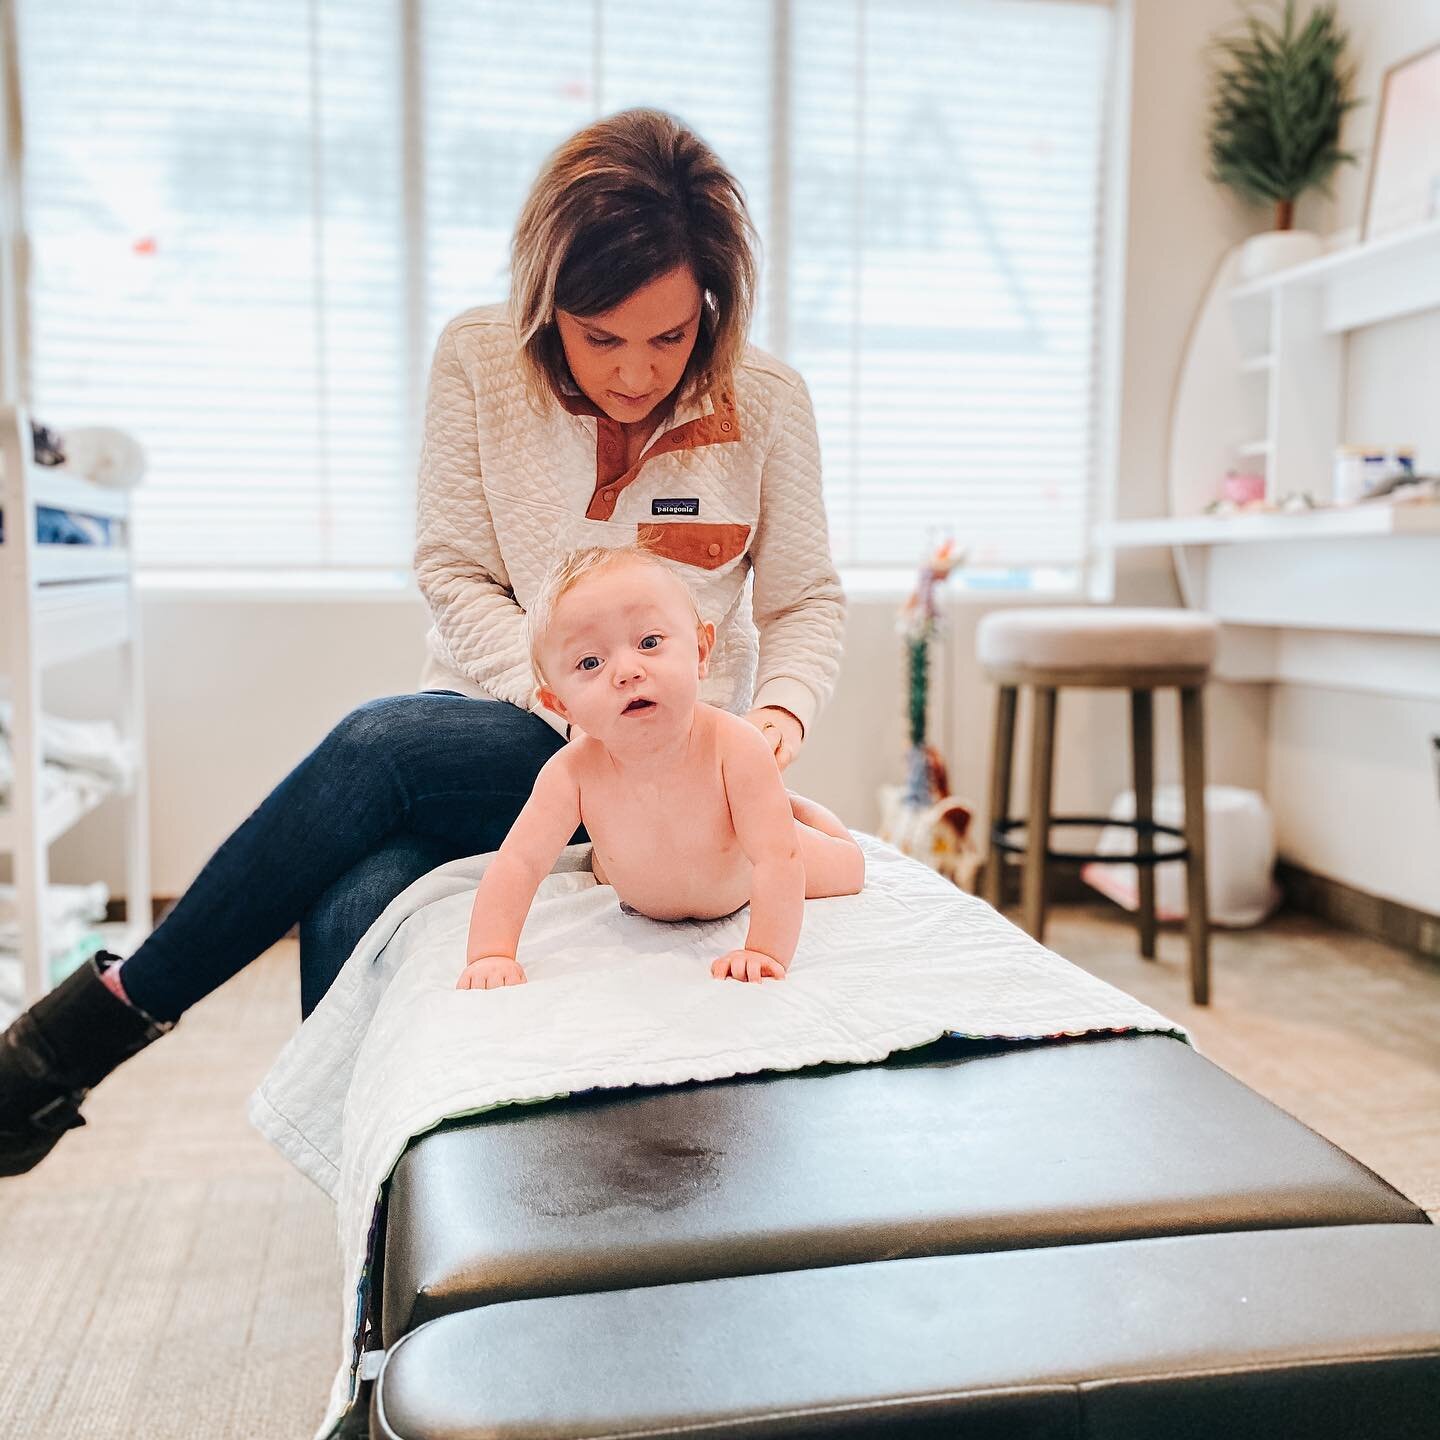 Oh baby, baby...baby baby! 🎶 

In our office, we believe everyone deserves customized care.

At your first appointment, the doctor looks over your paperwork, asks questions, makes notes, and performs a thermal scan that lets her know how your brain 